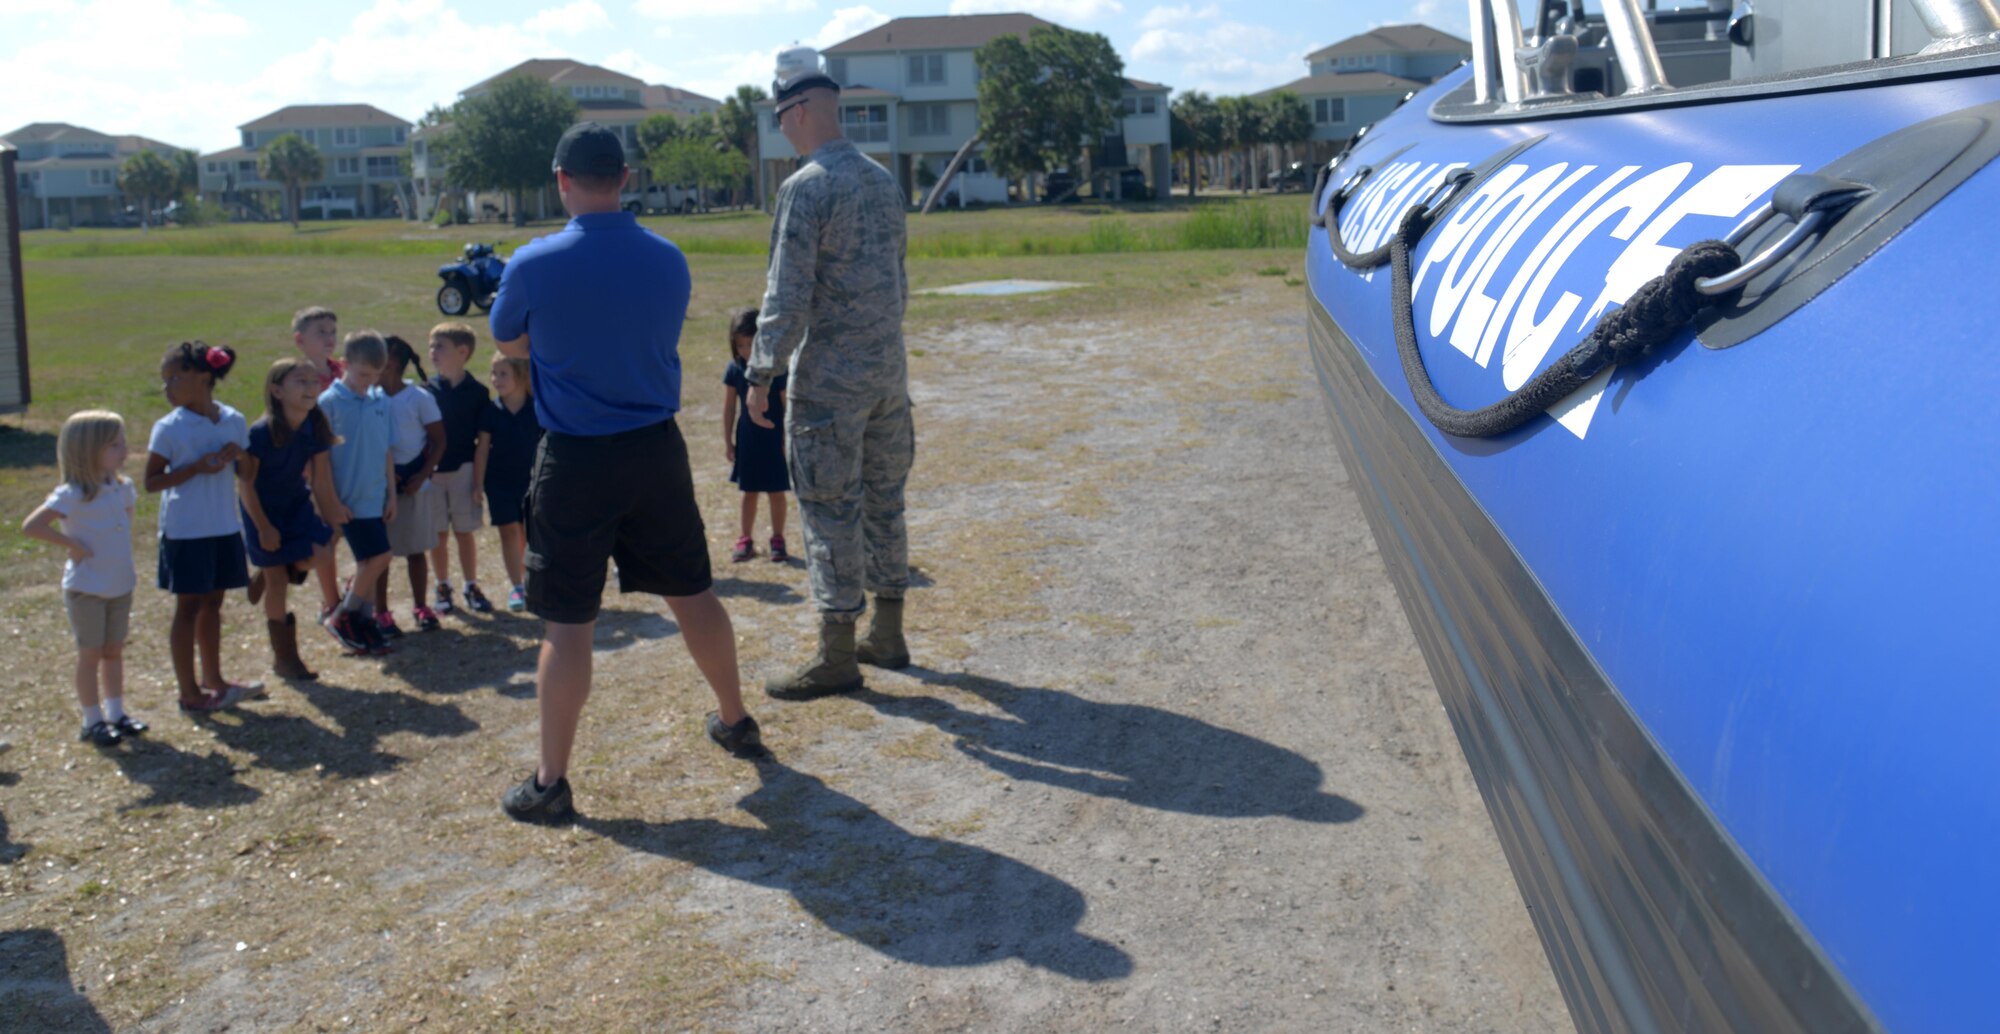 Airmen from the 6th Security Forces Squadron (SFS) Marine Patrol teach boating safety to Tinker Elementary School students at MacDill Air Force Base, Fla., May 16, 2017. The 6th SFS Marine Patrol also allowed students to tour a boat and handle the equipment. (U.S. Air Force photo by Senior Airman Tori Long)